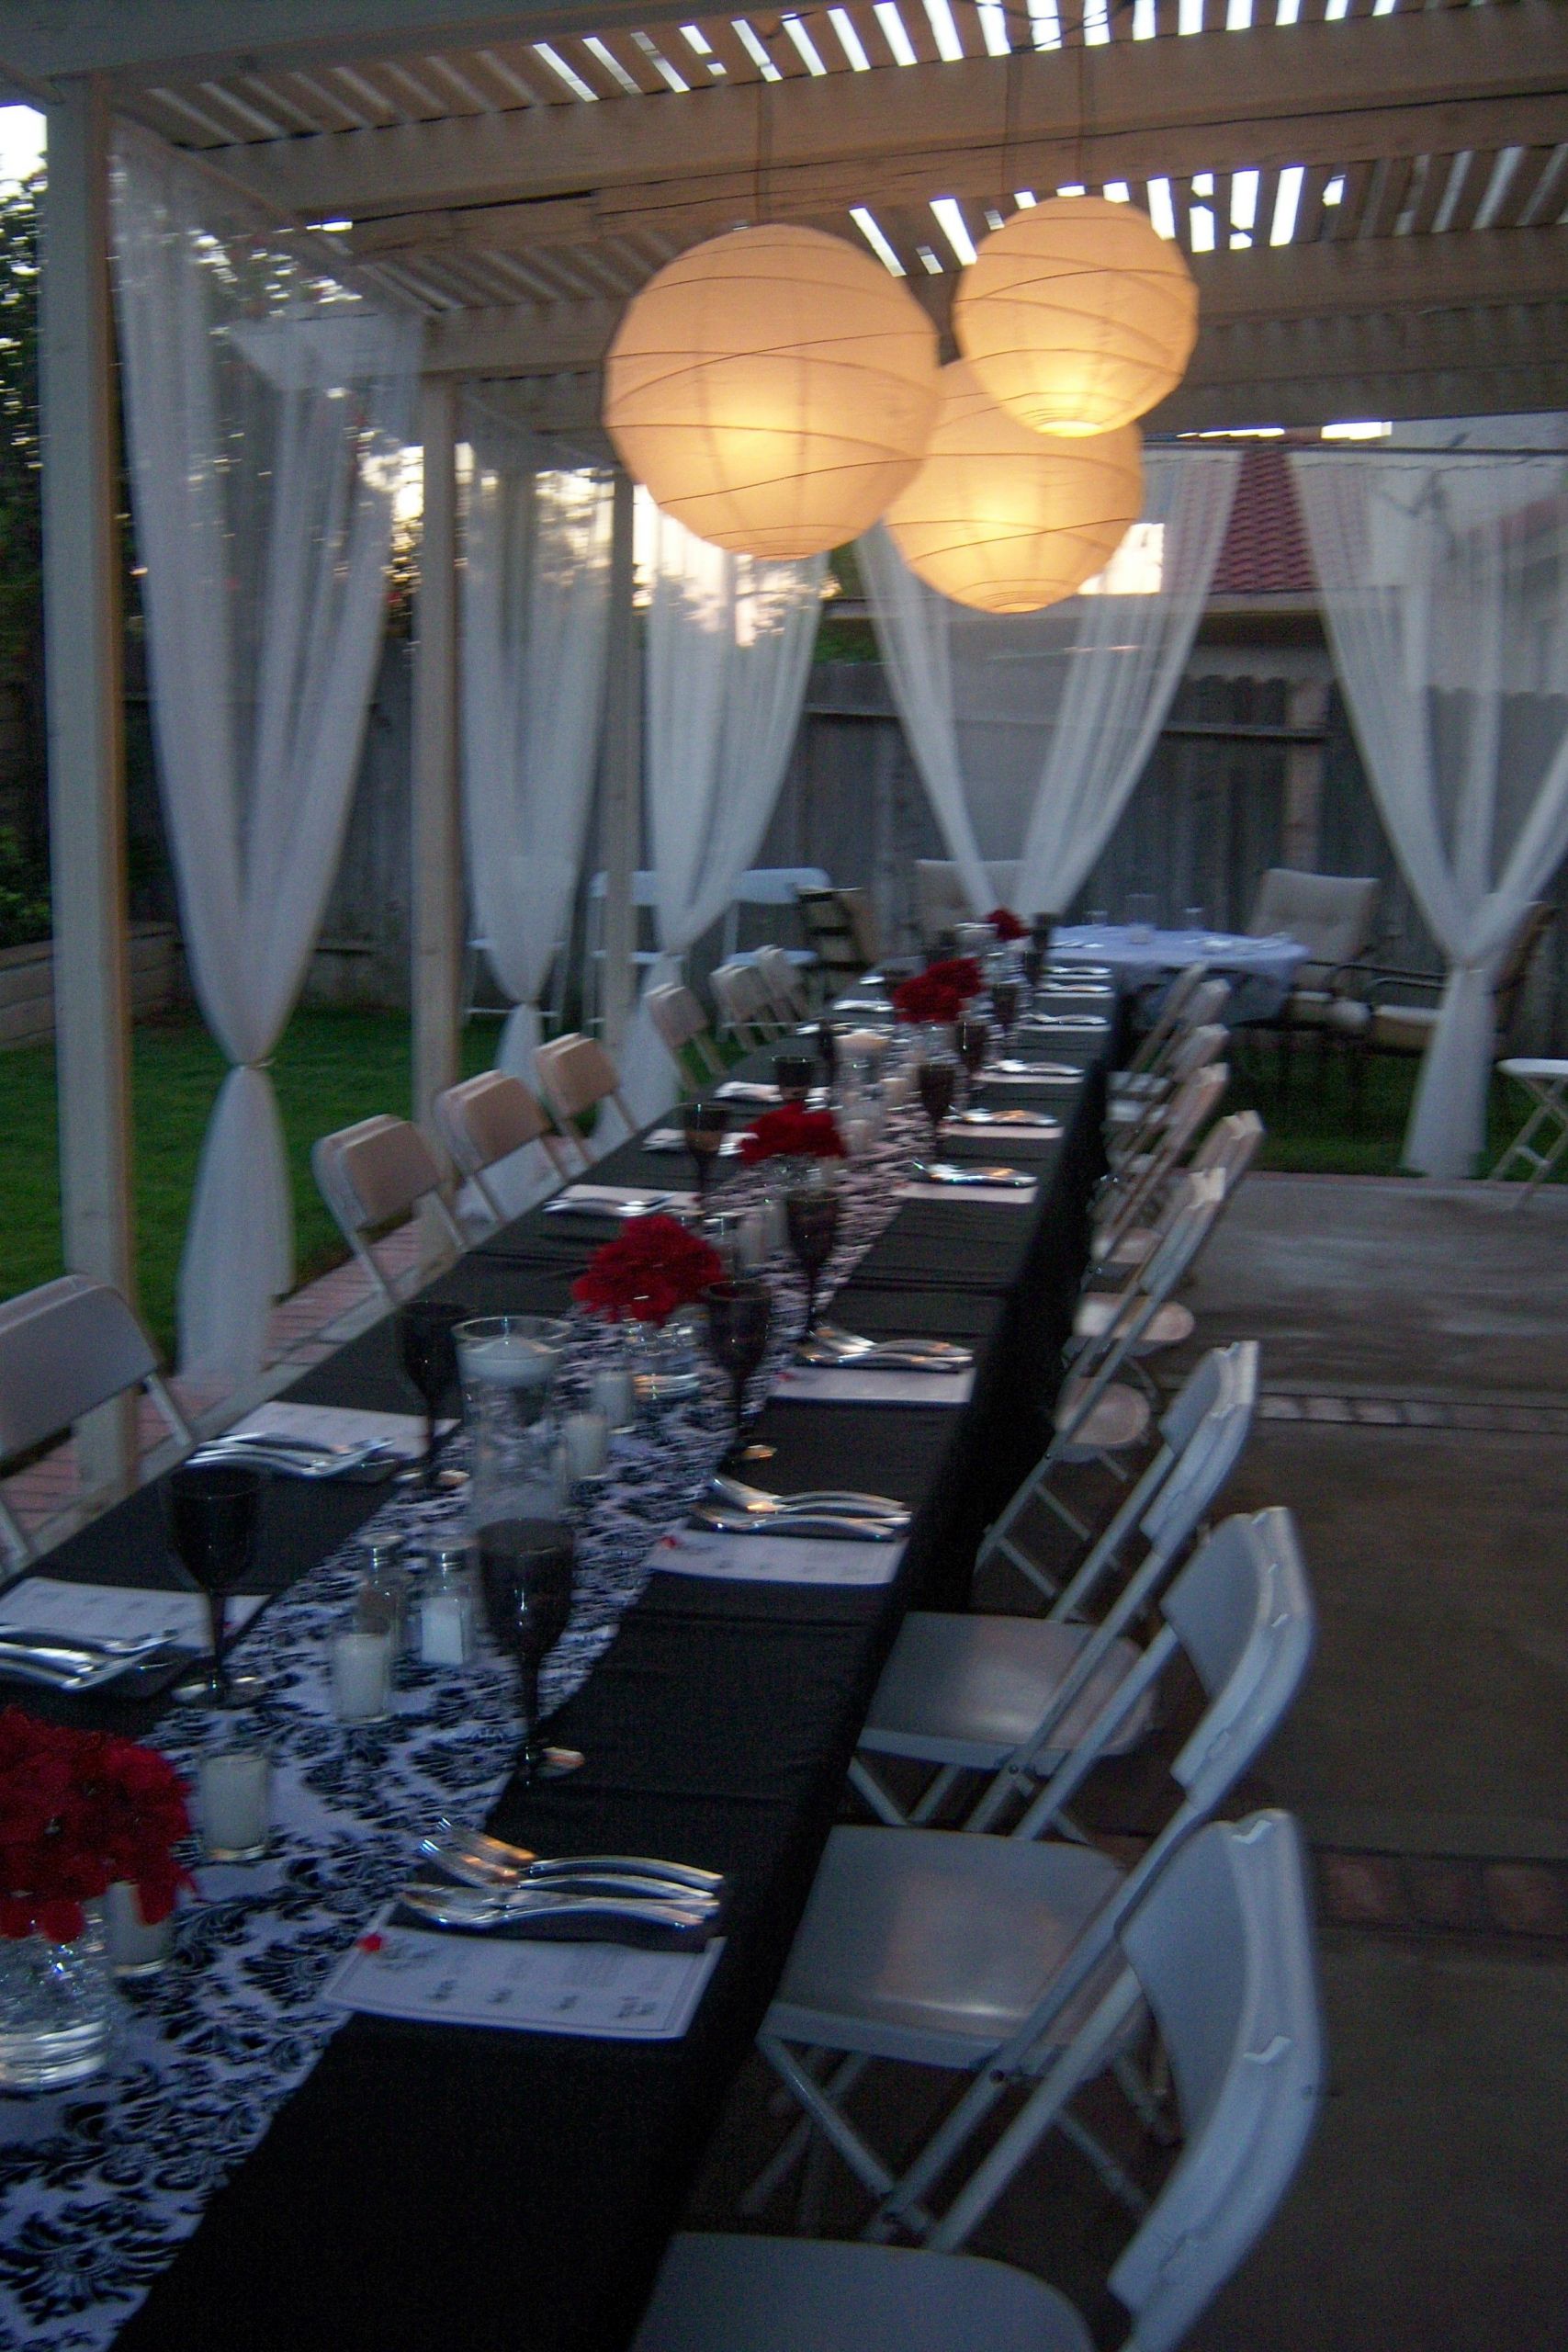 Graduation Party Ideas For A Small Backyard
 My backyard dinner party My Events CCC